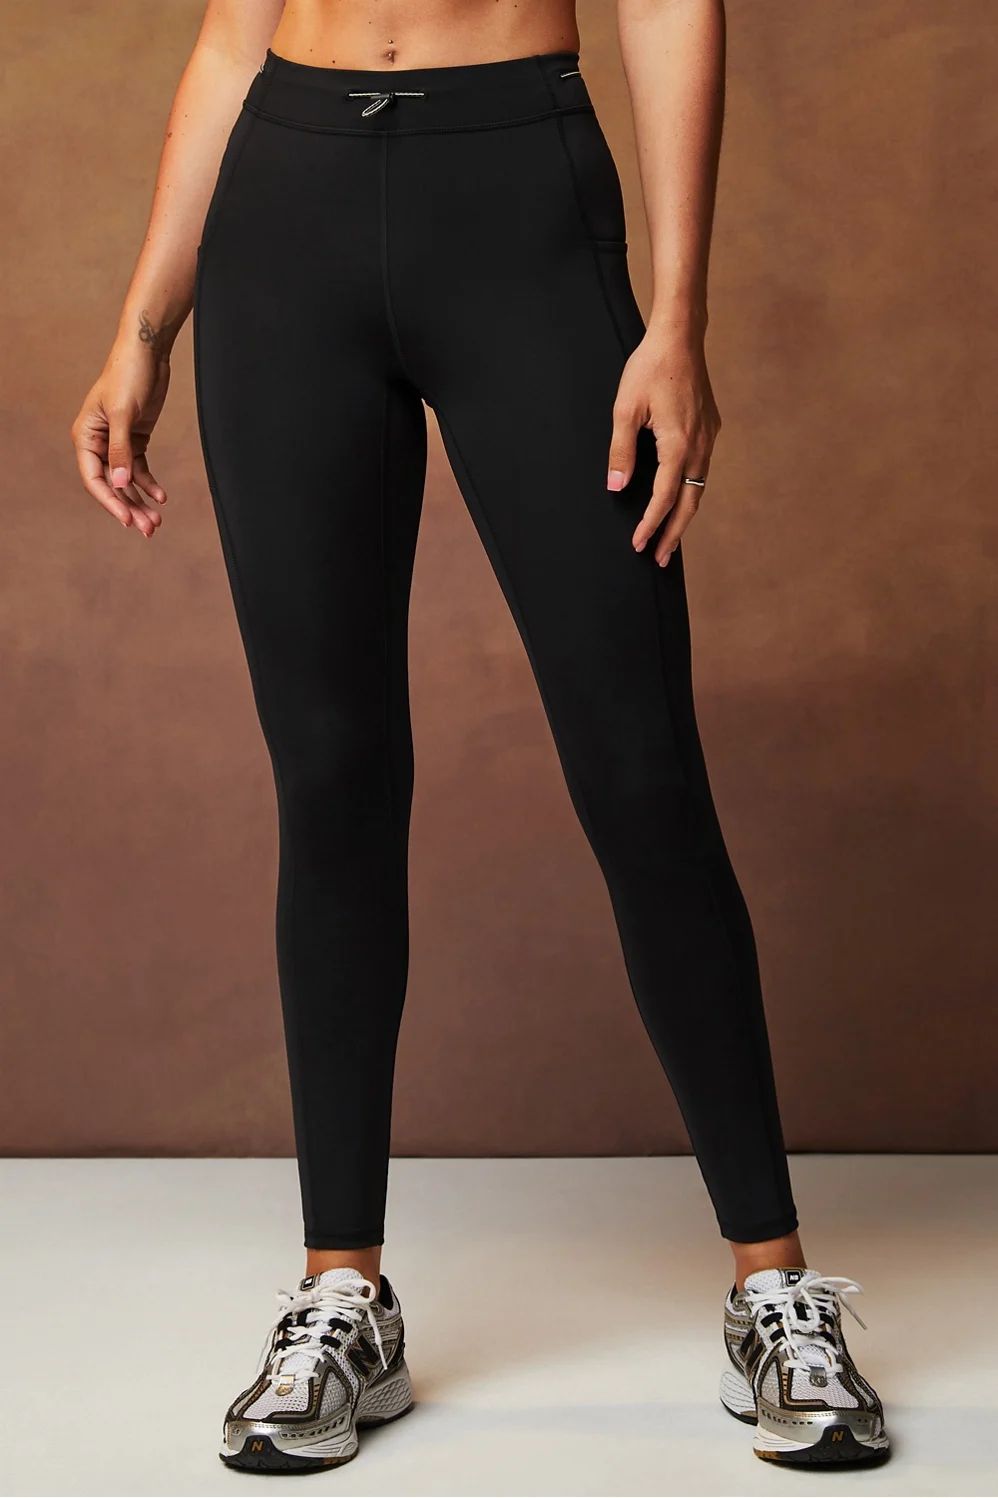 Motion365+ High-Waisted Bungee Legging | Fabletics - North America